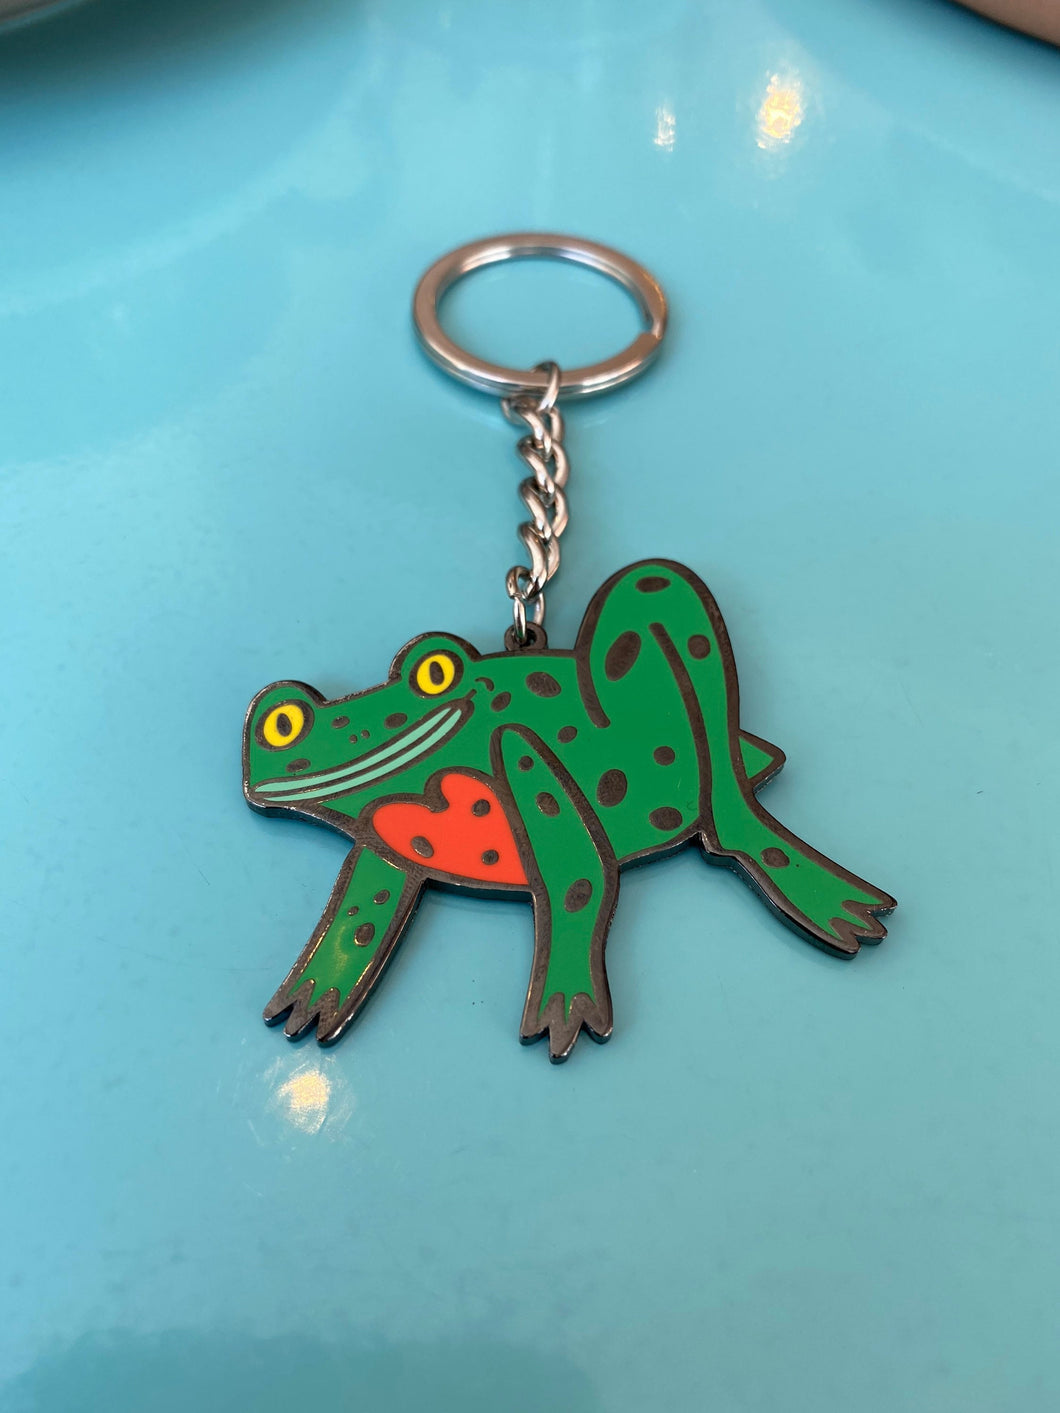 Frog Key Ring - Lucky Frog Prince - Cute Frog With Love Heart Illustration, Tree Frog, Green Animal Keychain, Funny Cute Gift Idea - Fernandes Makes